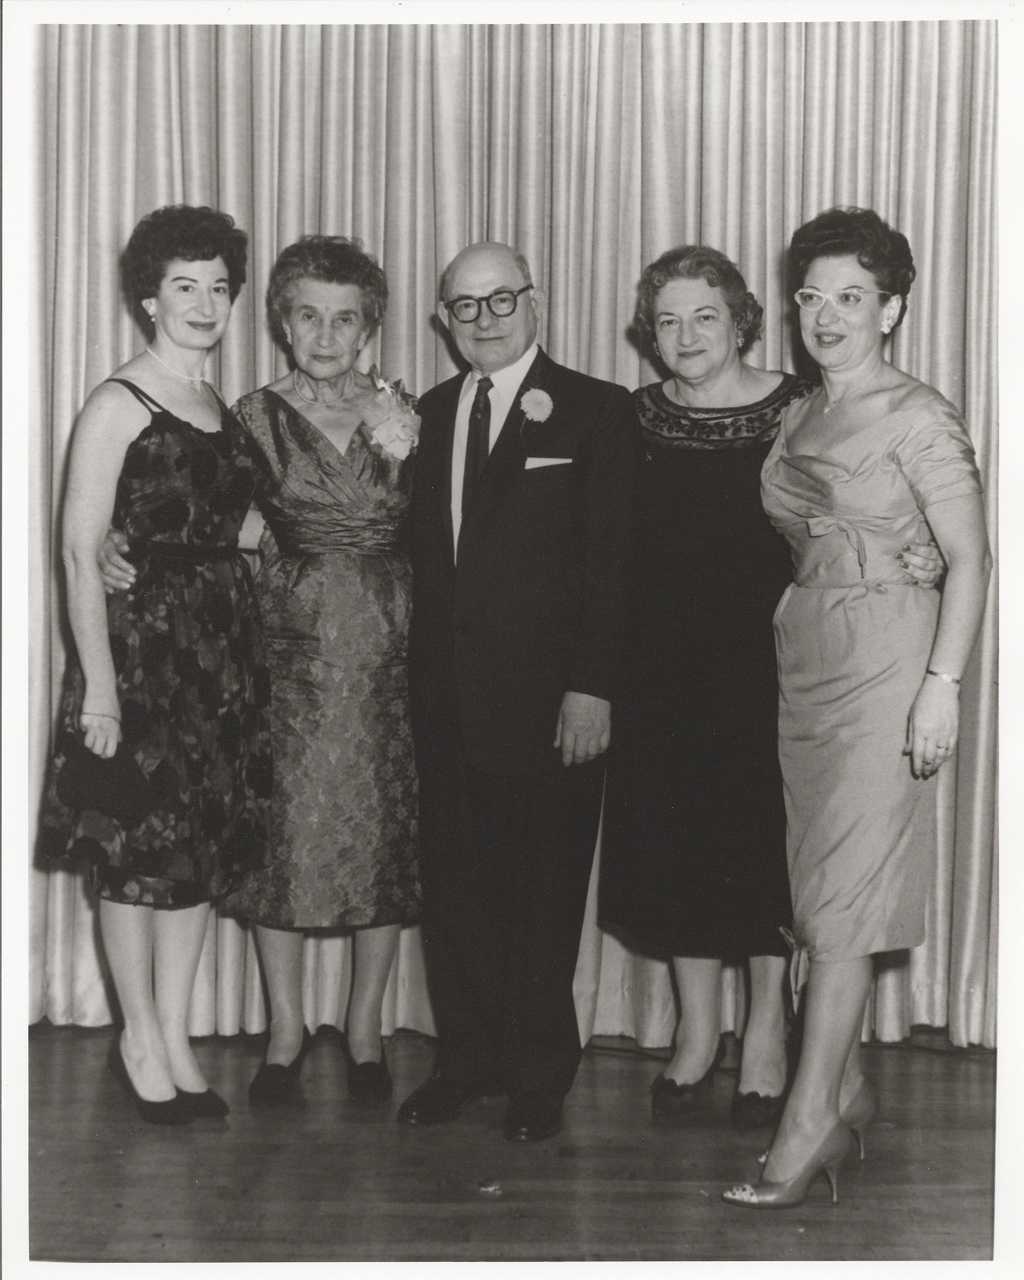 ROSE AND MAX GELB WITH THEIR 3 DAUGHTER: ESSIE STEELE, EDNA ROME, AND SYLVIA KESSLER.